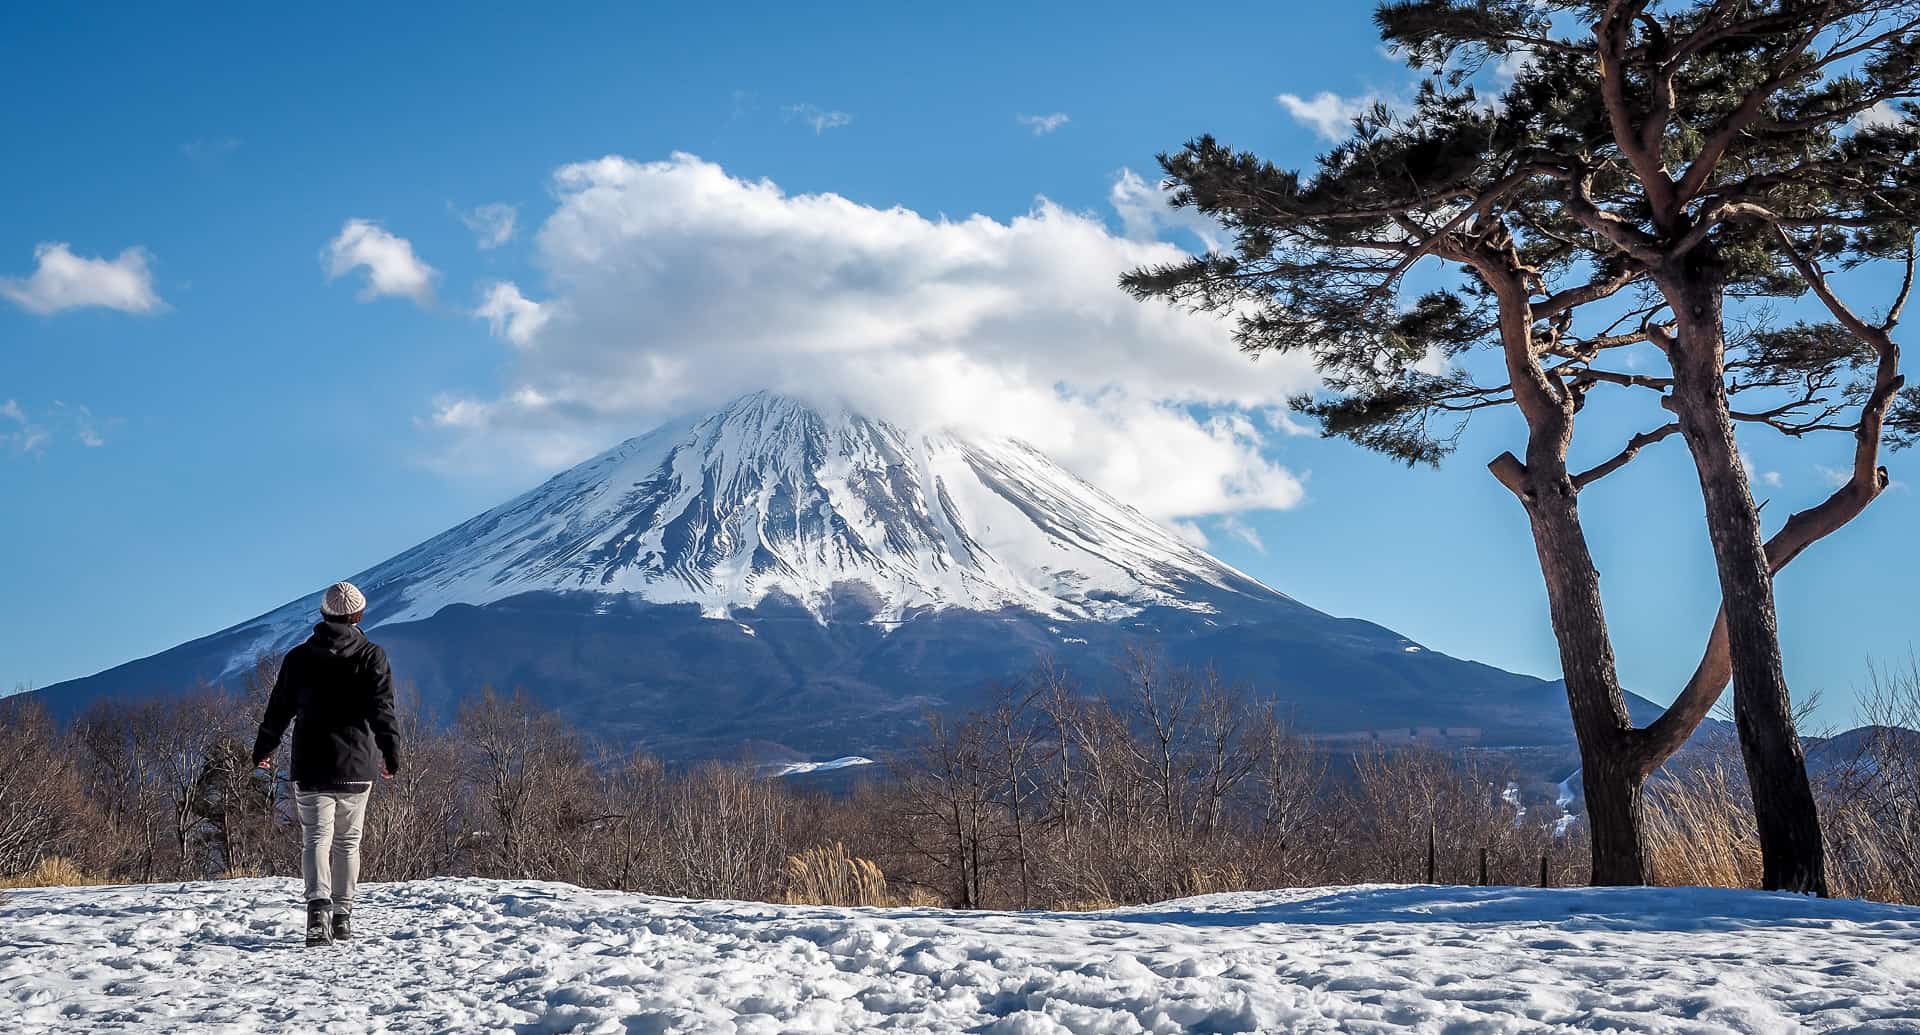 How to Go to Mount Fuji? 